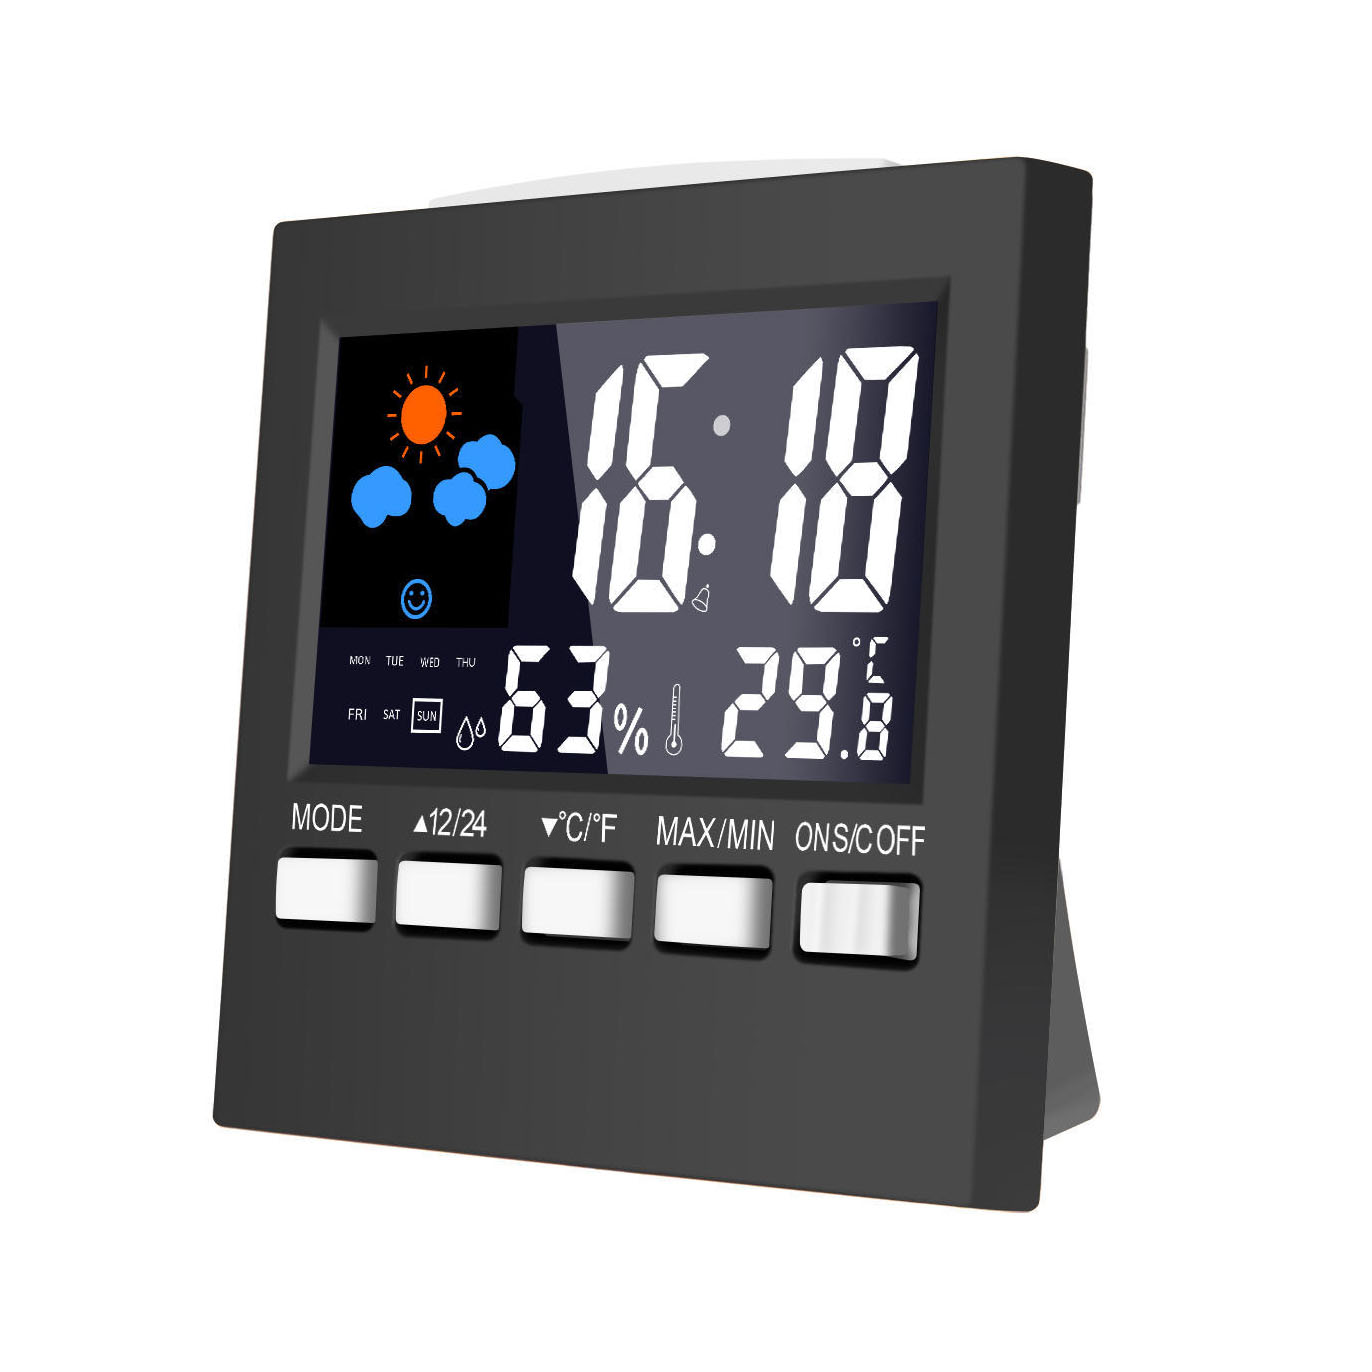 Loskii-DC-002-Digital-Weather-Station-Thermometer-Hygrometer-Alarm-Clock-with-Colorful-LED-Display-S-1209936